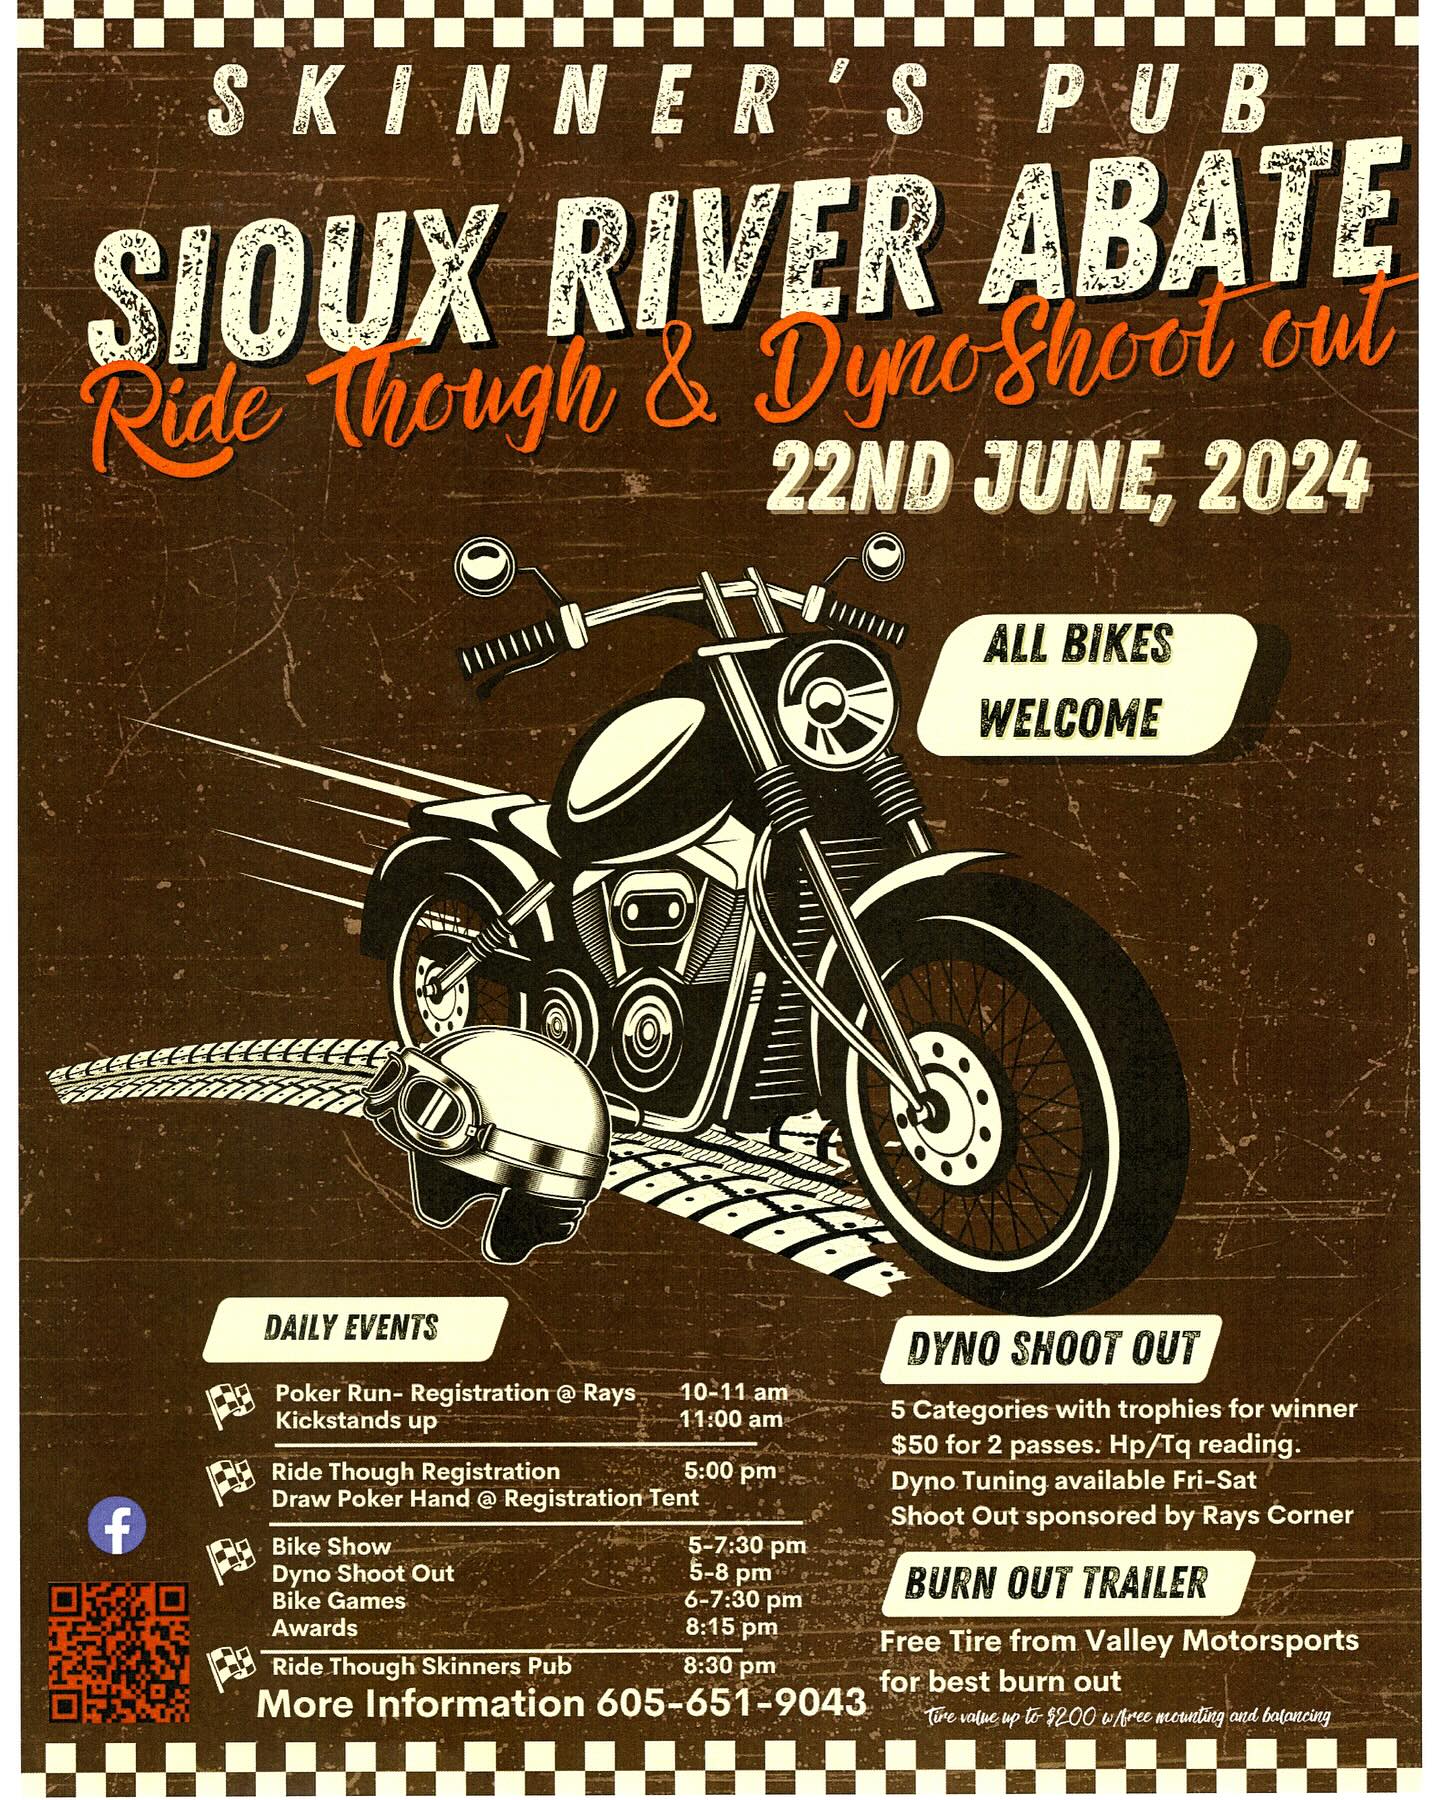 Sioux River ABATE Ride Through & Dyno-Shoot Out